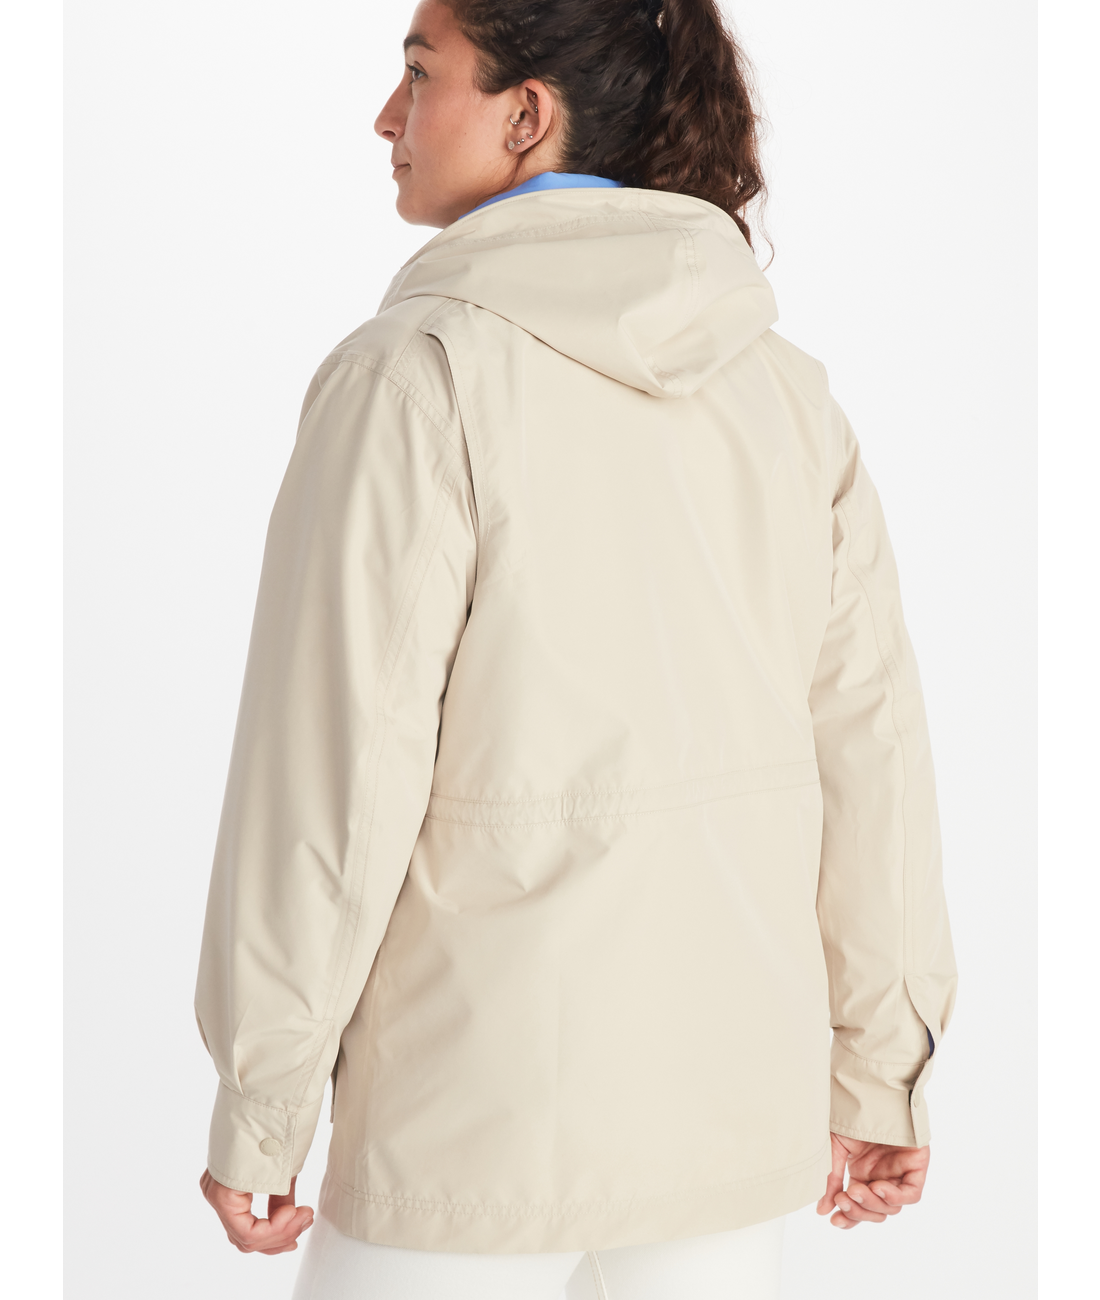 Wms 78 All-Weather Parka